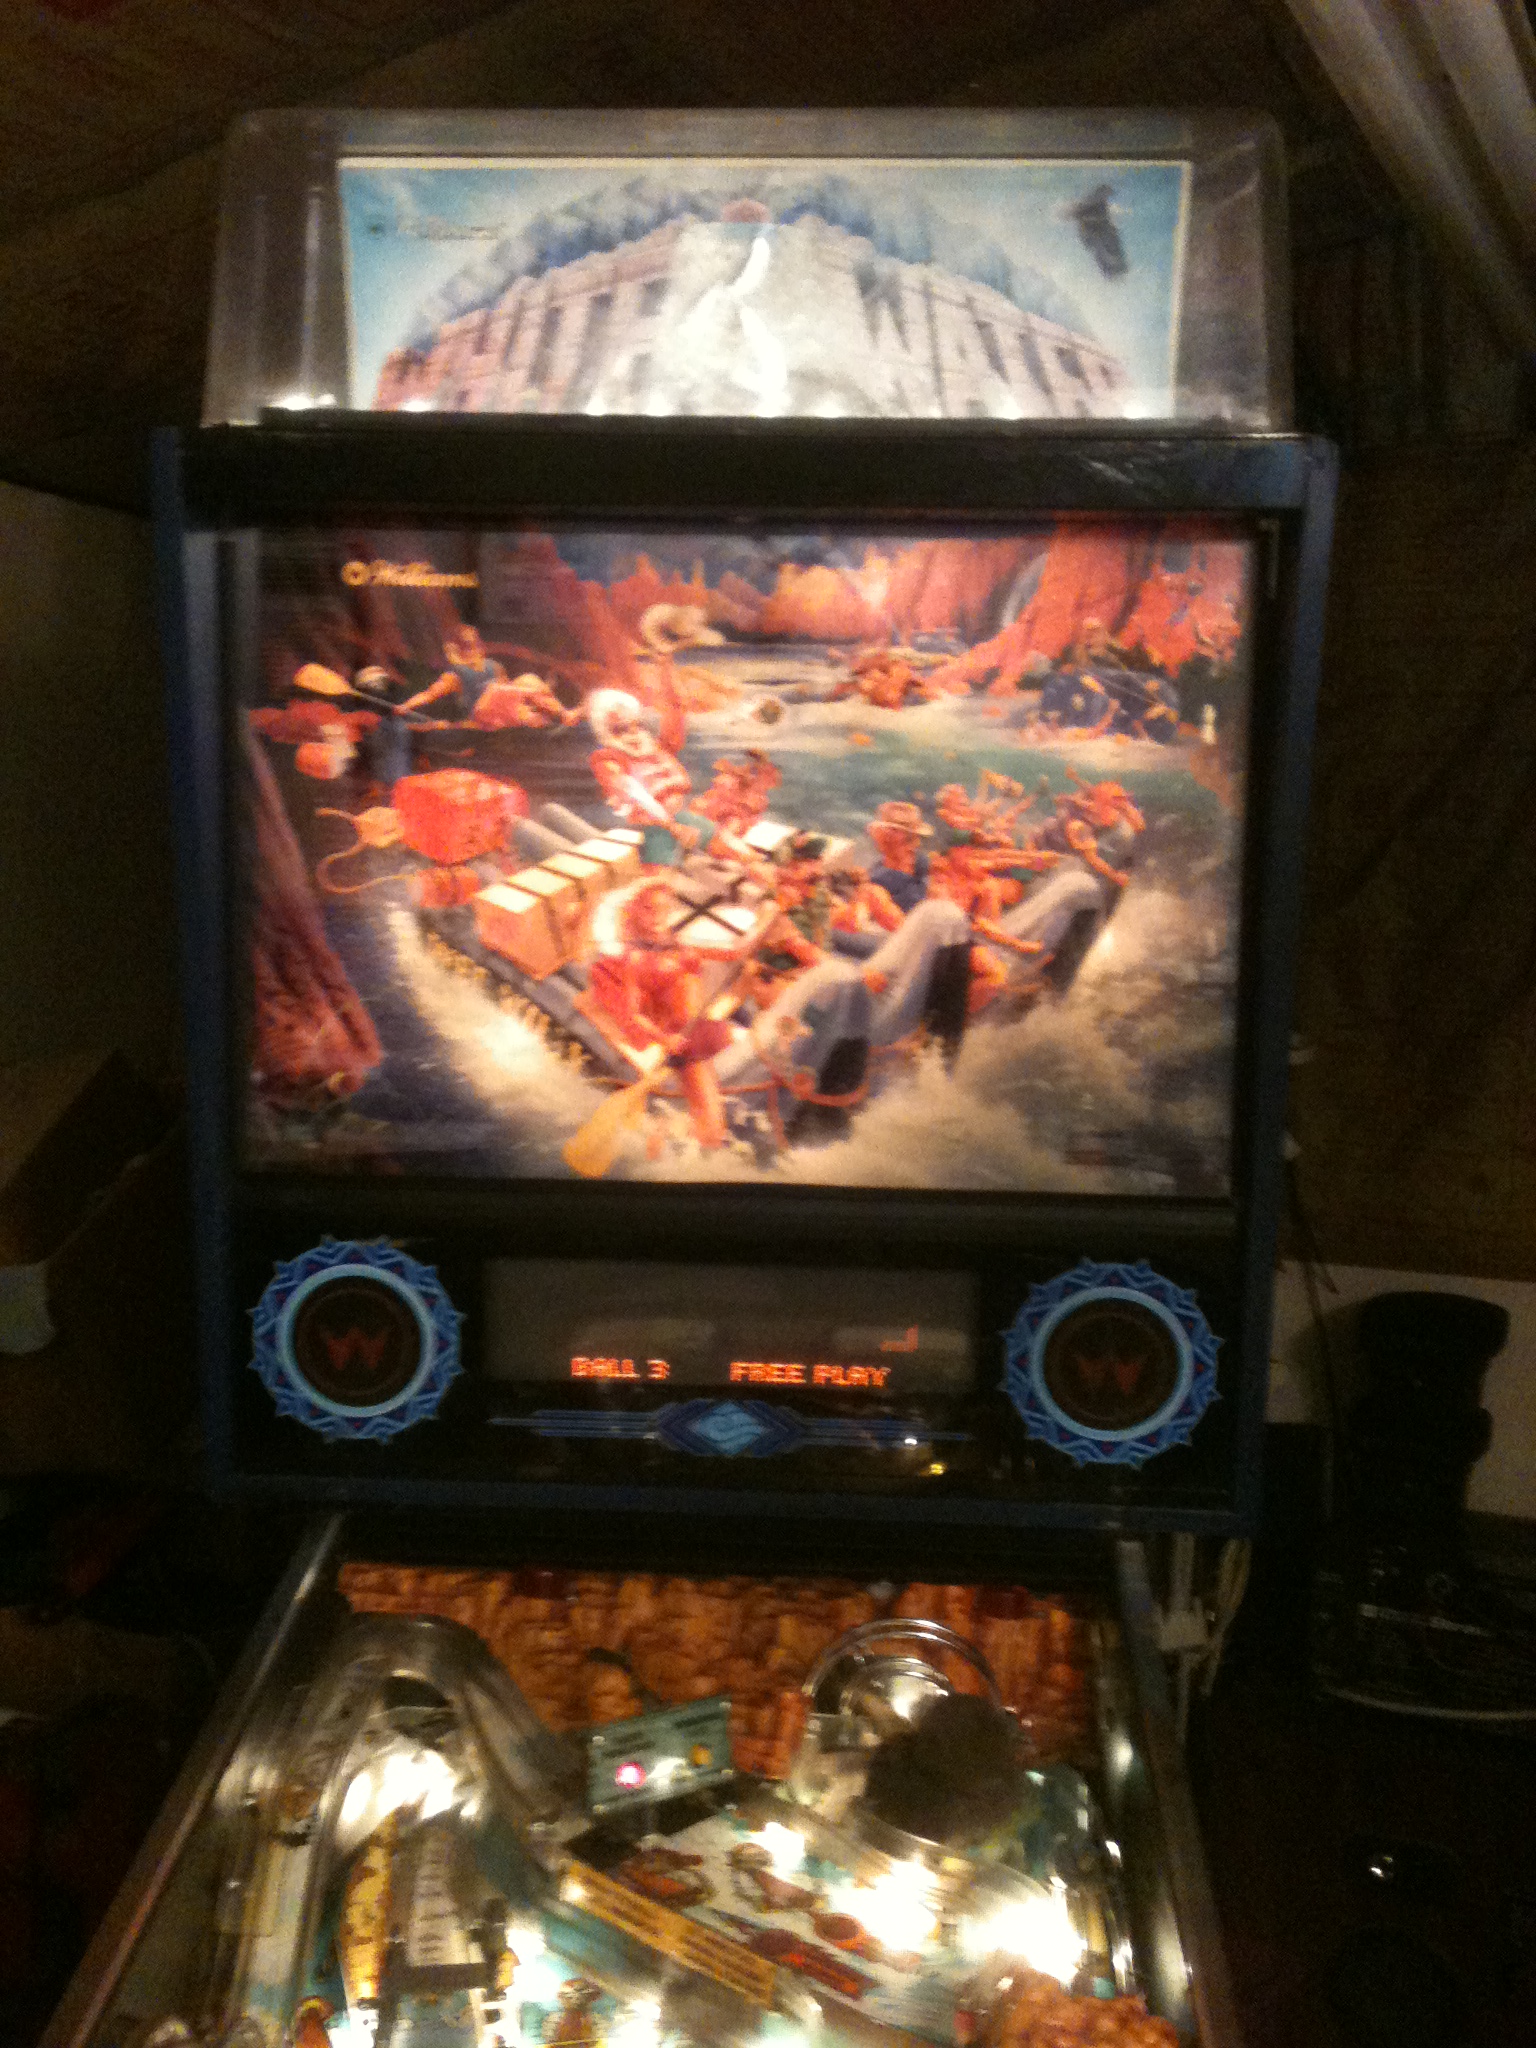 Whiterwater pinball by Williams 1993 - Click Image to Close